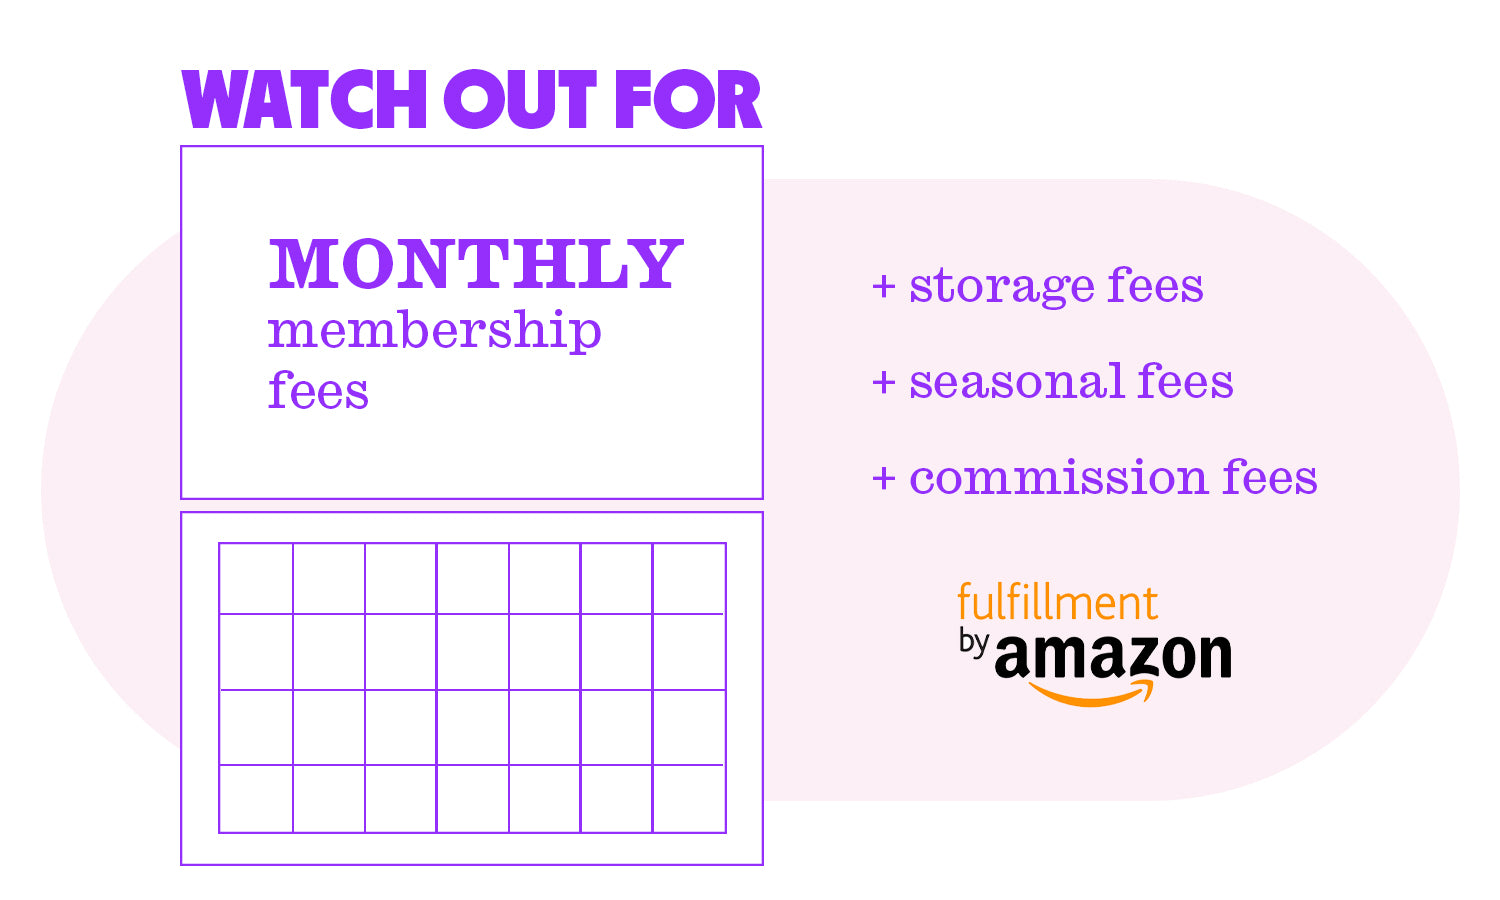 Amazon FBA requres an initial set up fee and ongoing membership fees.